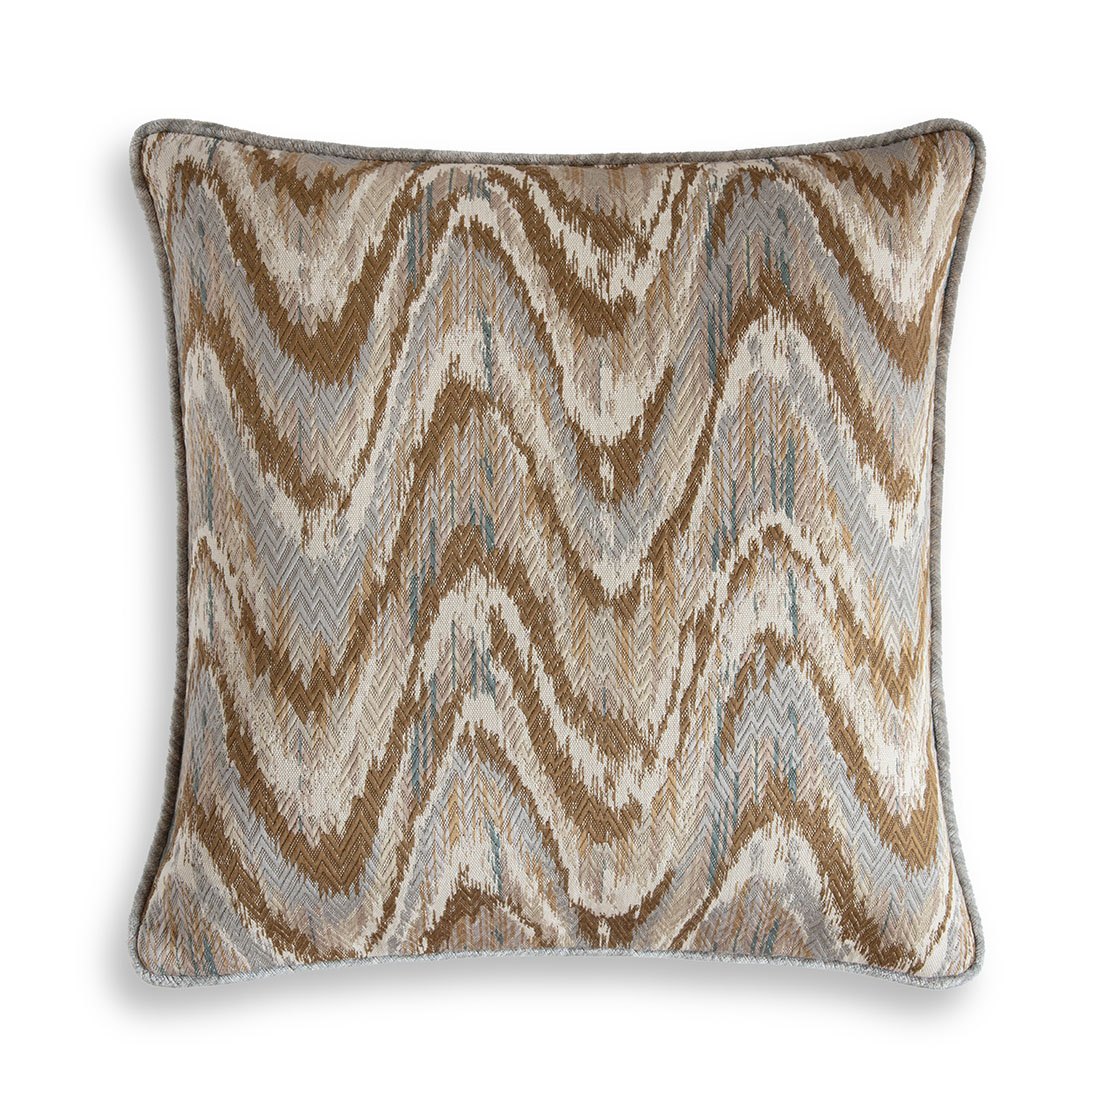 Kyma cushion - Driftwood backed and piped in Como silk velvet - Sage - Beaumont & Fletcher